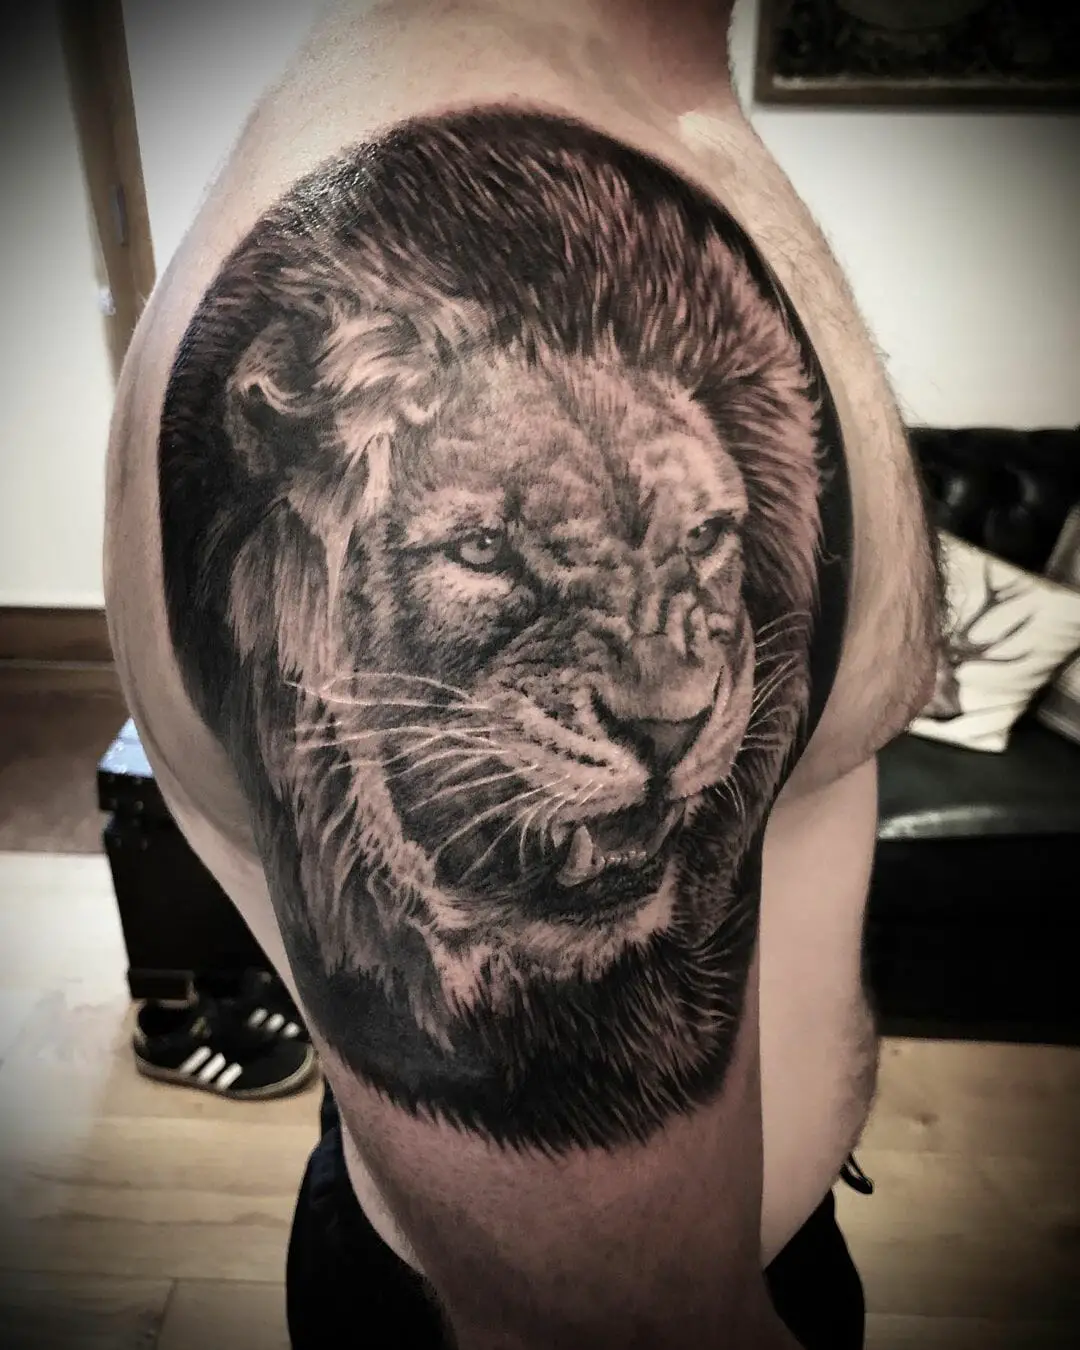 61 Stunning Lion Shoulder Tattoos for Men to Try Now